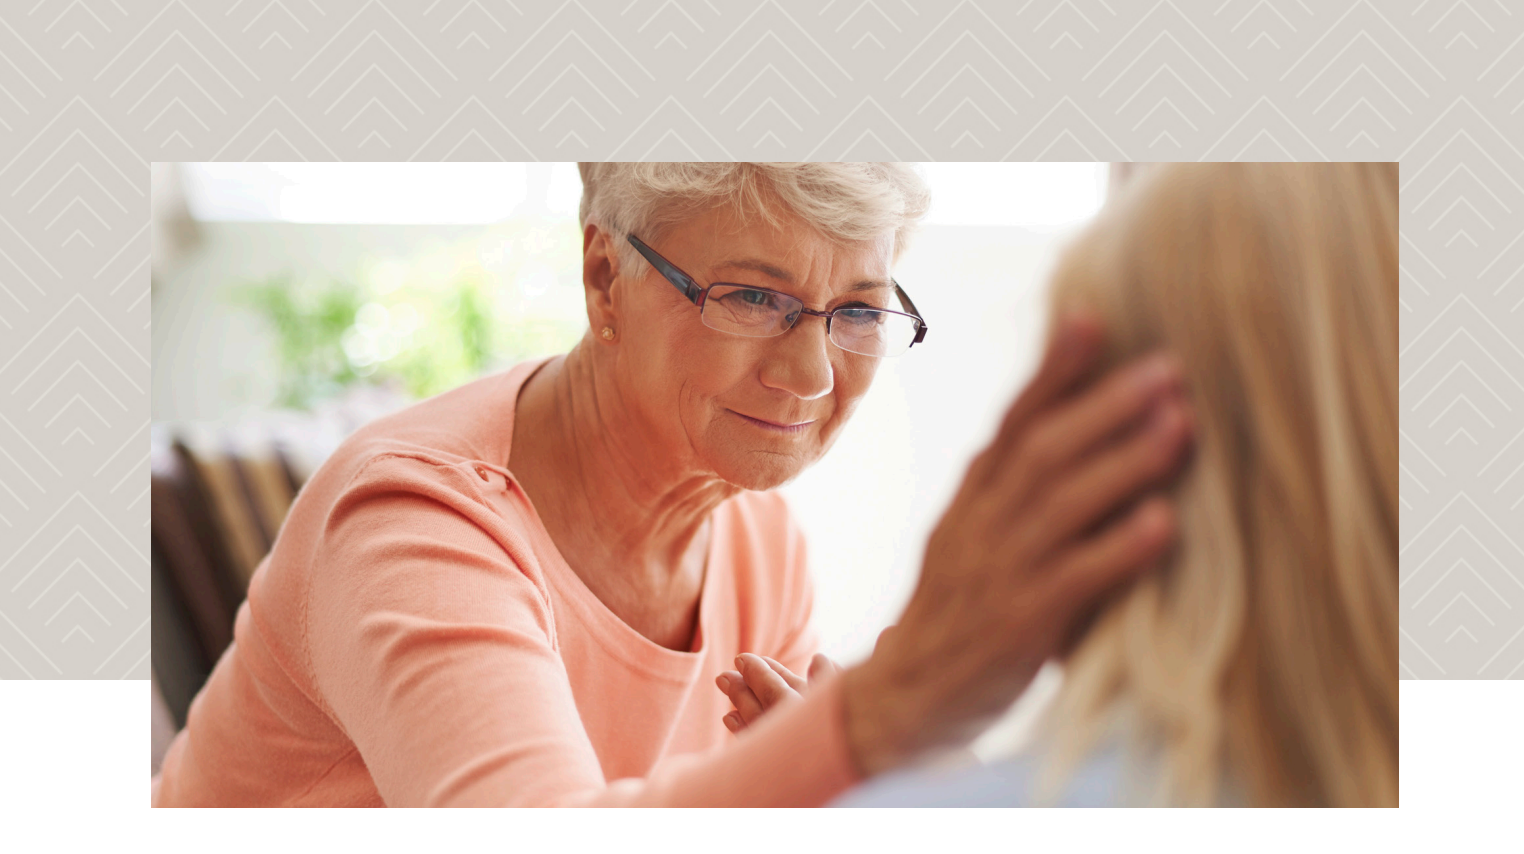 How to Manage Long-Distance Caregiver Guilt